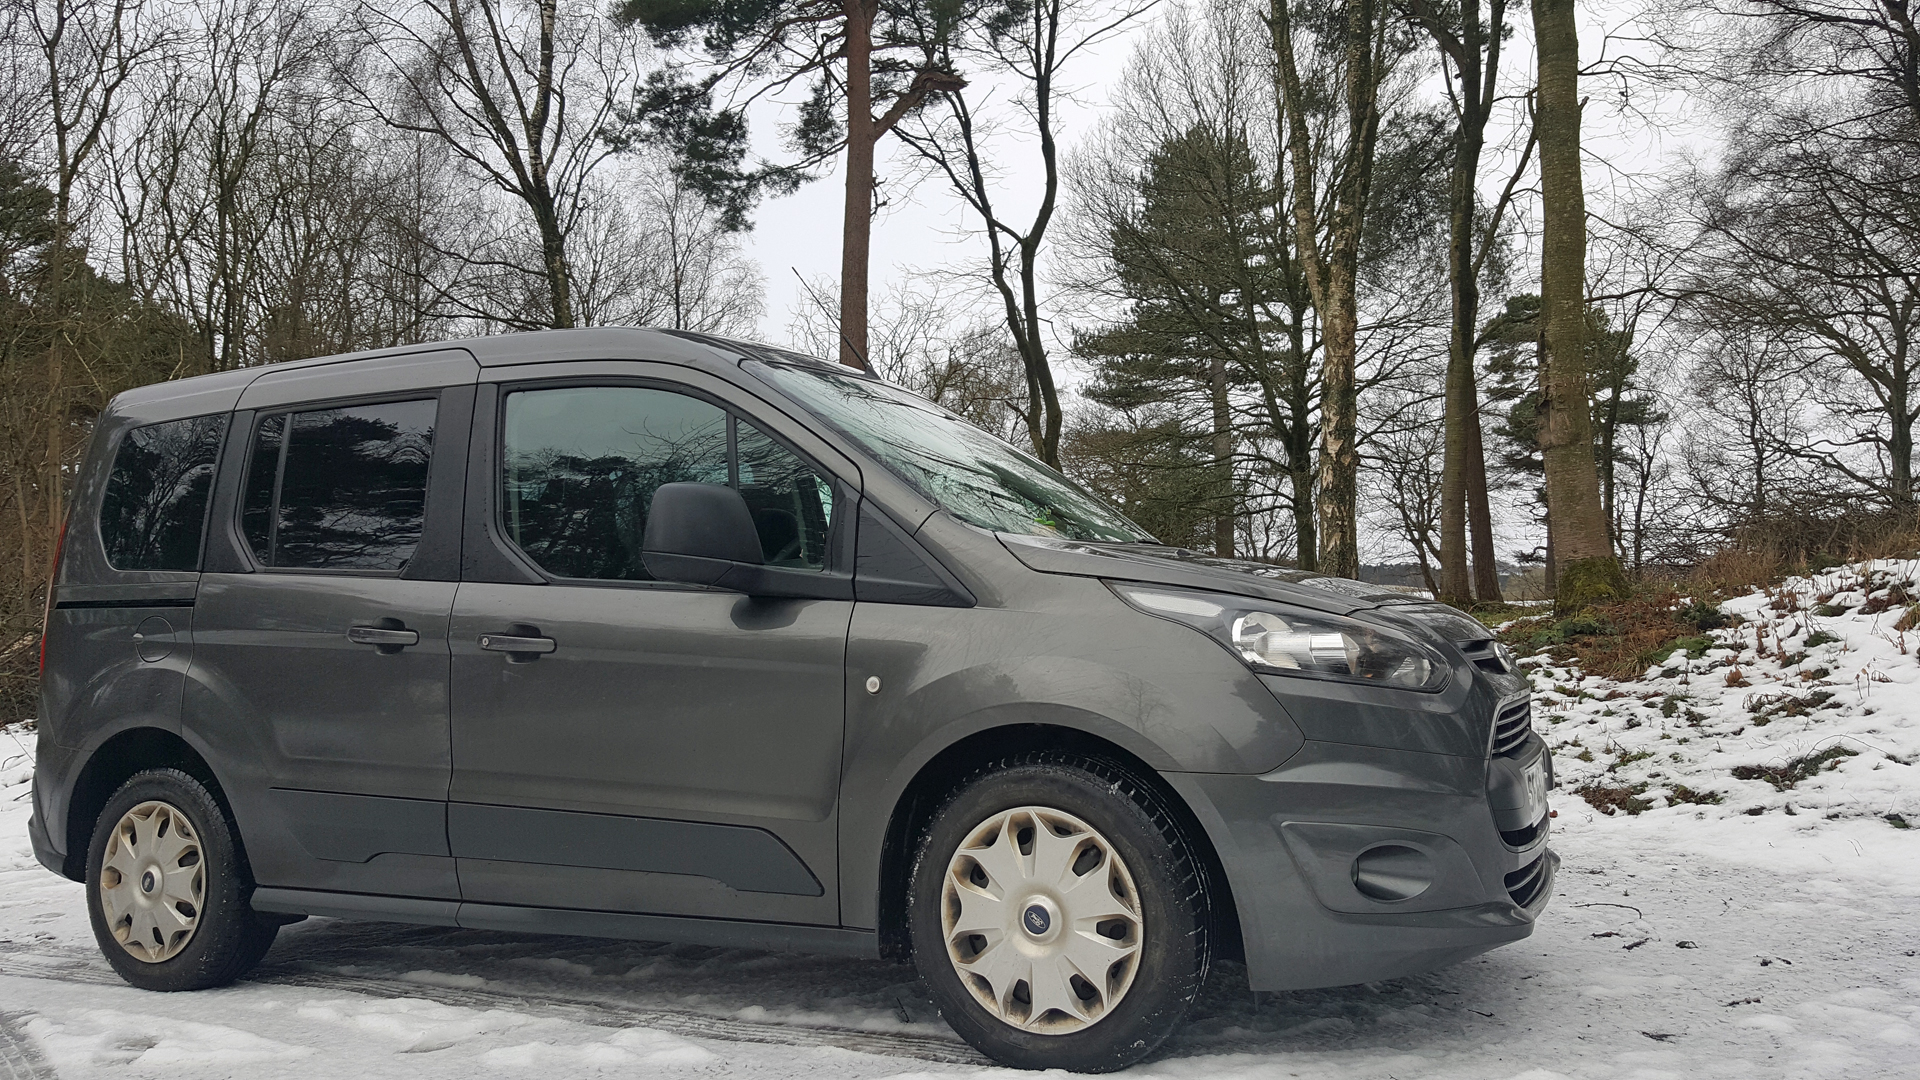 Ford Connect Freedom™ WAV parked on a snowy road surrounded by snow covered trees: 6 Top Tips How to Choose The Best Wheelchair Accessible Vehicle (WAV)